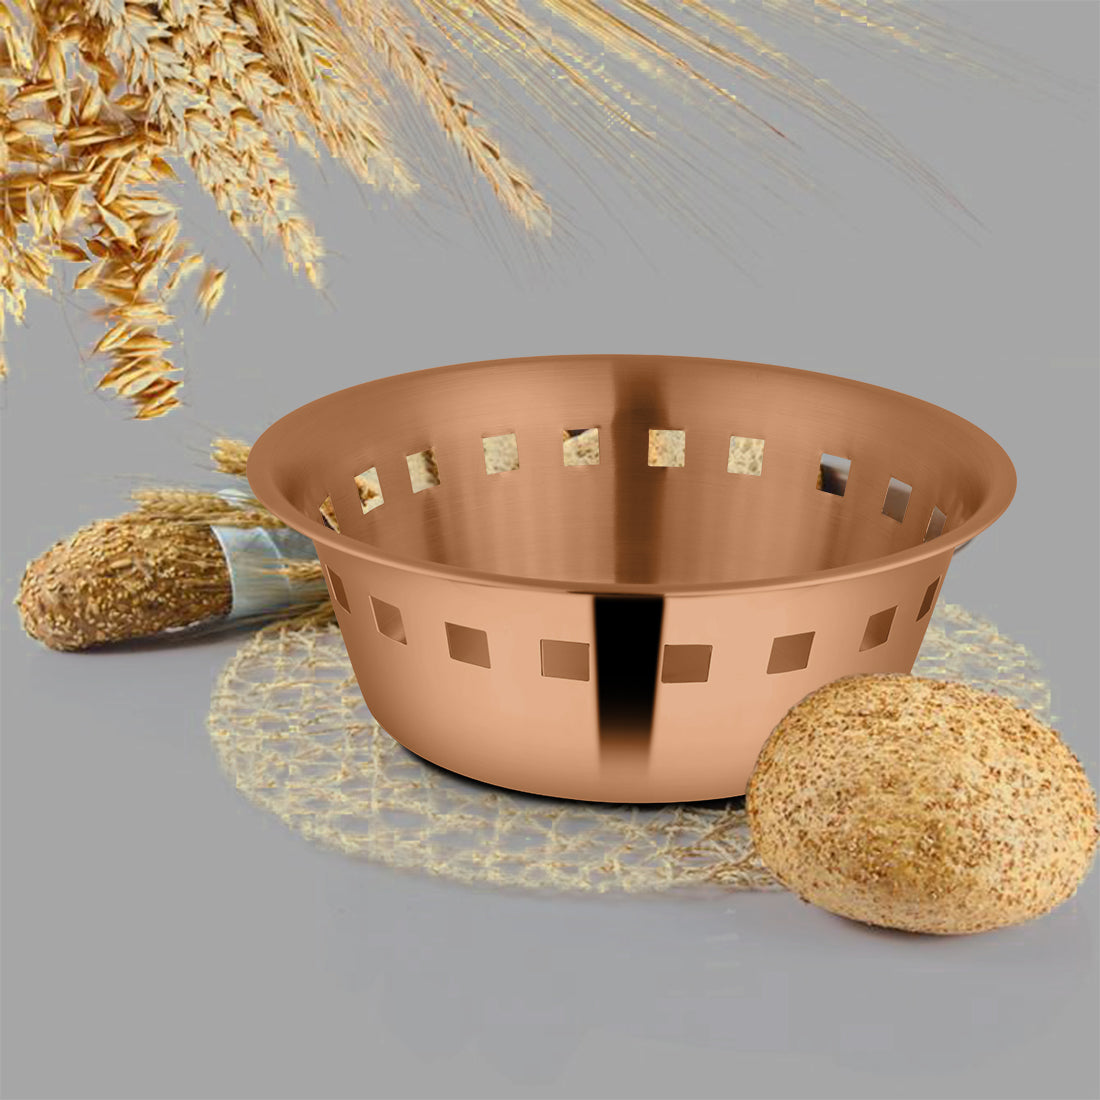 Stainless Steel Bread Basket with Rose Gold PVD Coating Majestic